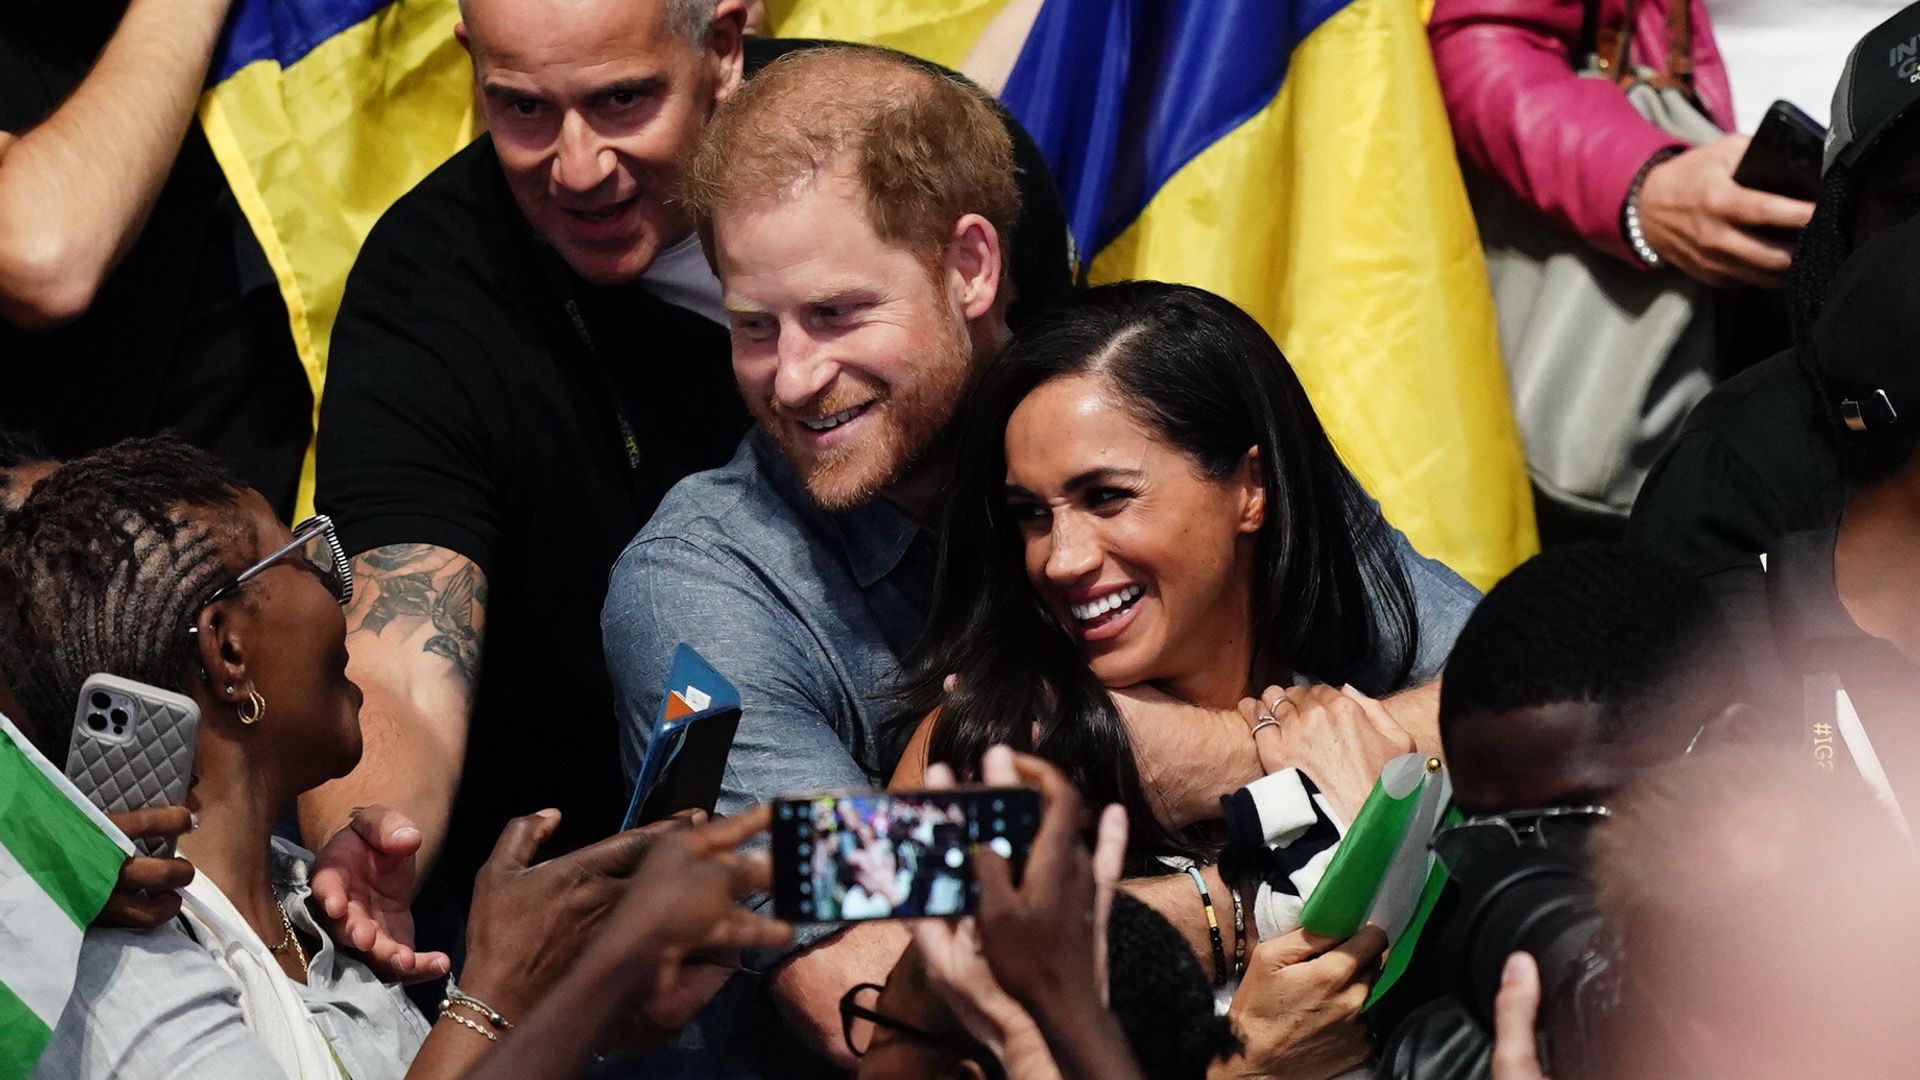 Prince Harry and Meghan Markle enjoy intimate moment and pose for selfies on day six of Invictus Games